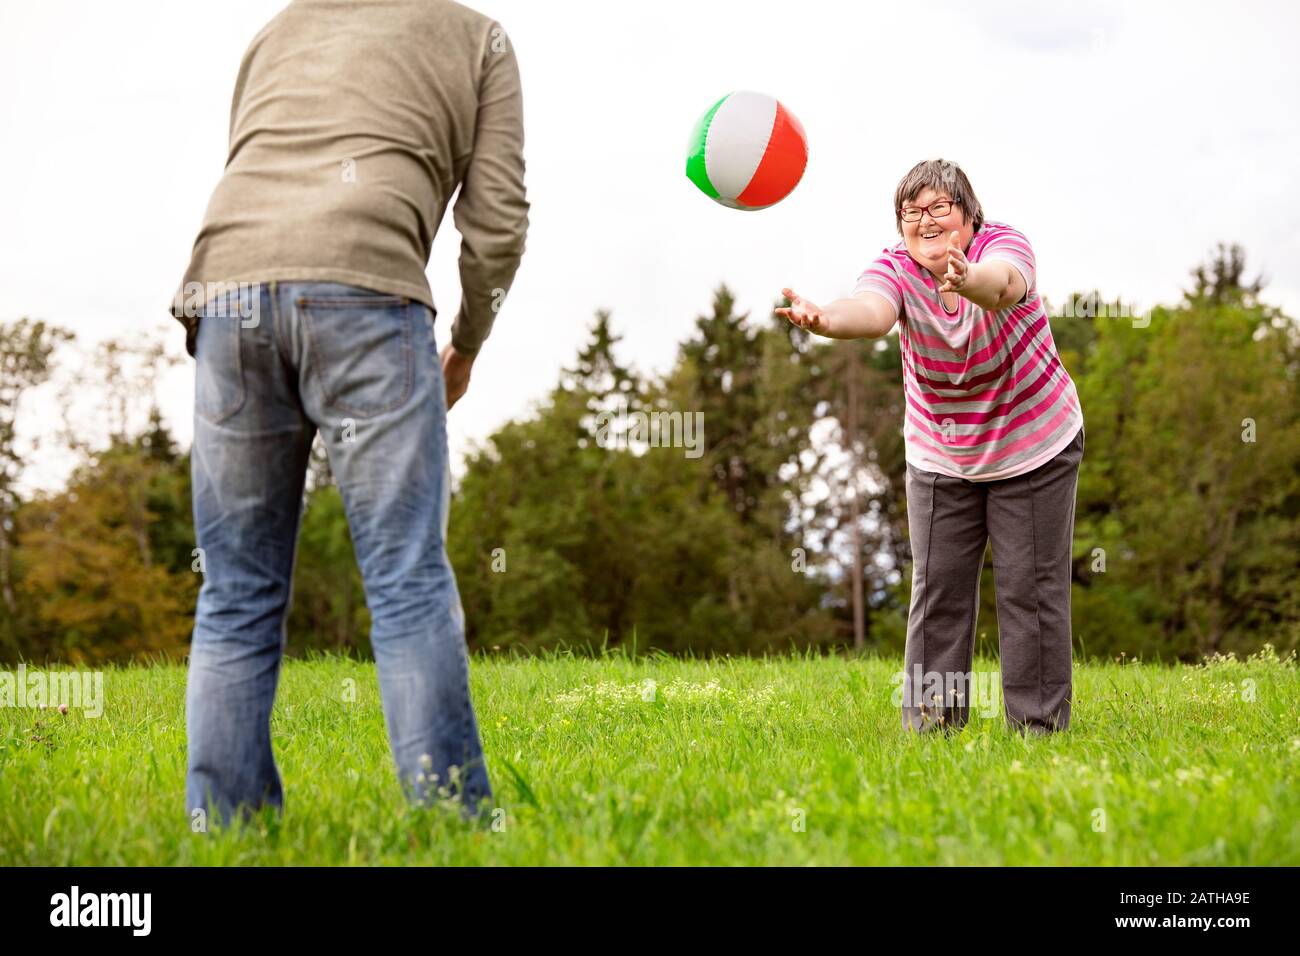 mental disabled woman is throwing a ball to a man to train her motor function, exercises with a friend or therapist outdoors on a meadow Stock Photo